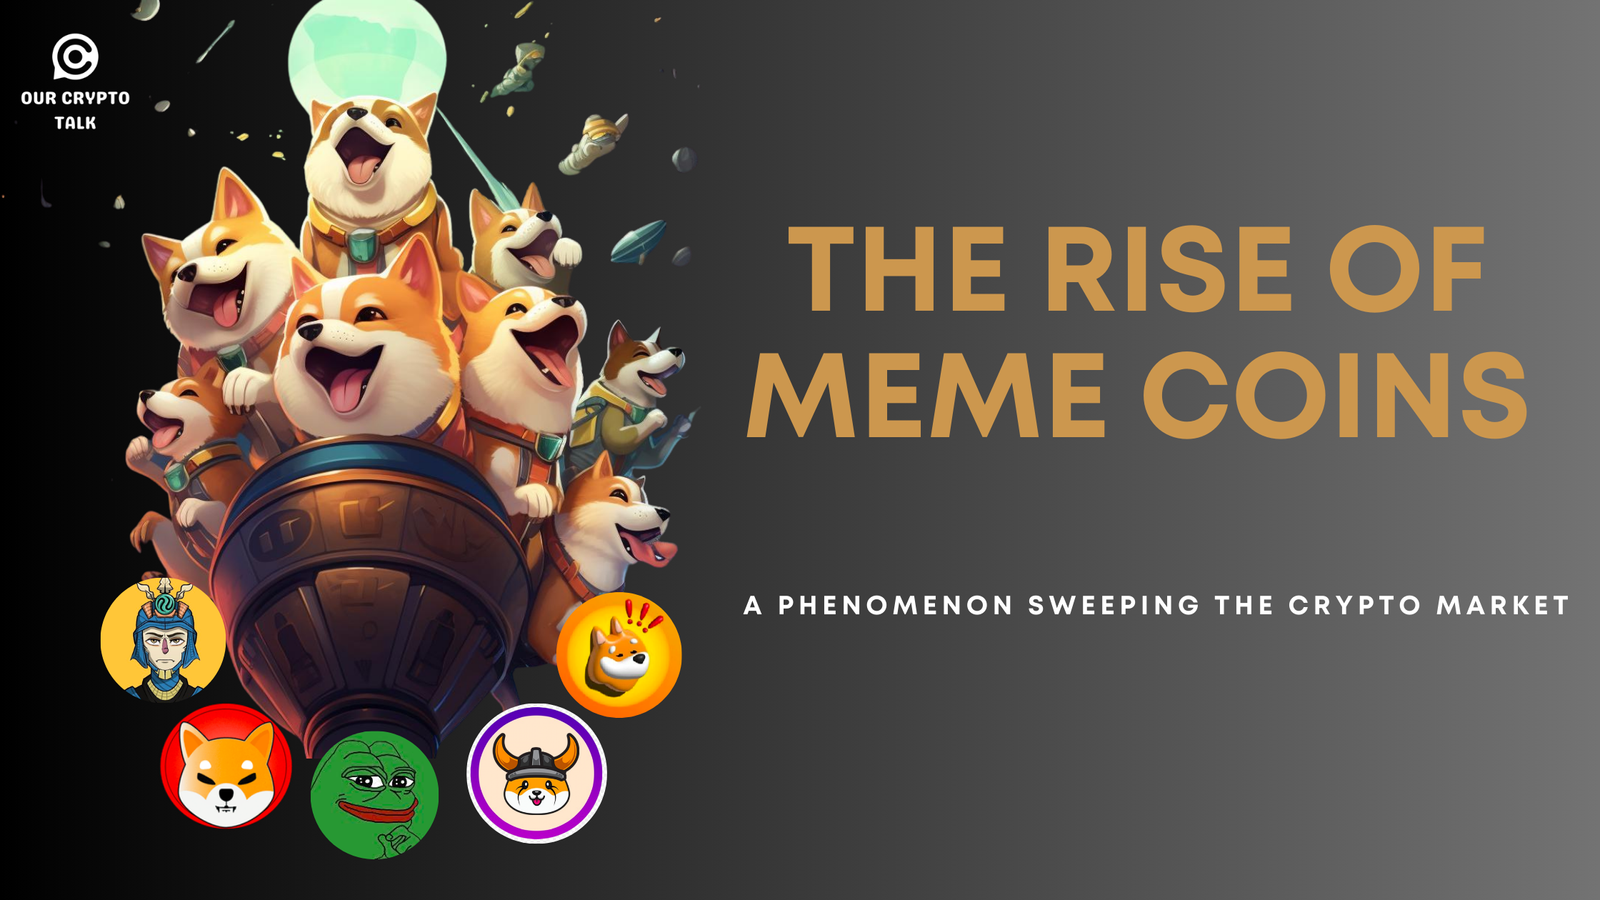 The Rise of Meme Coins image